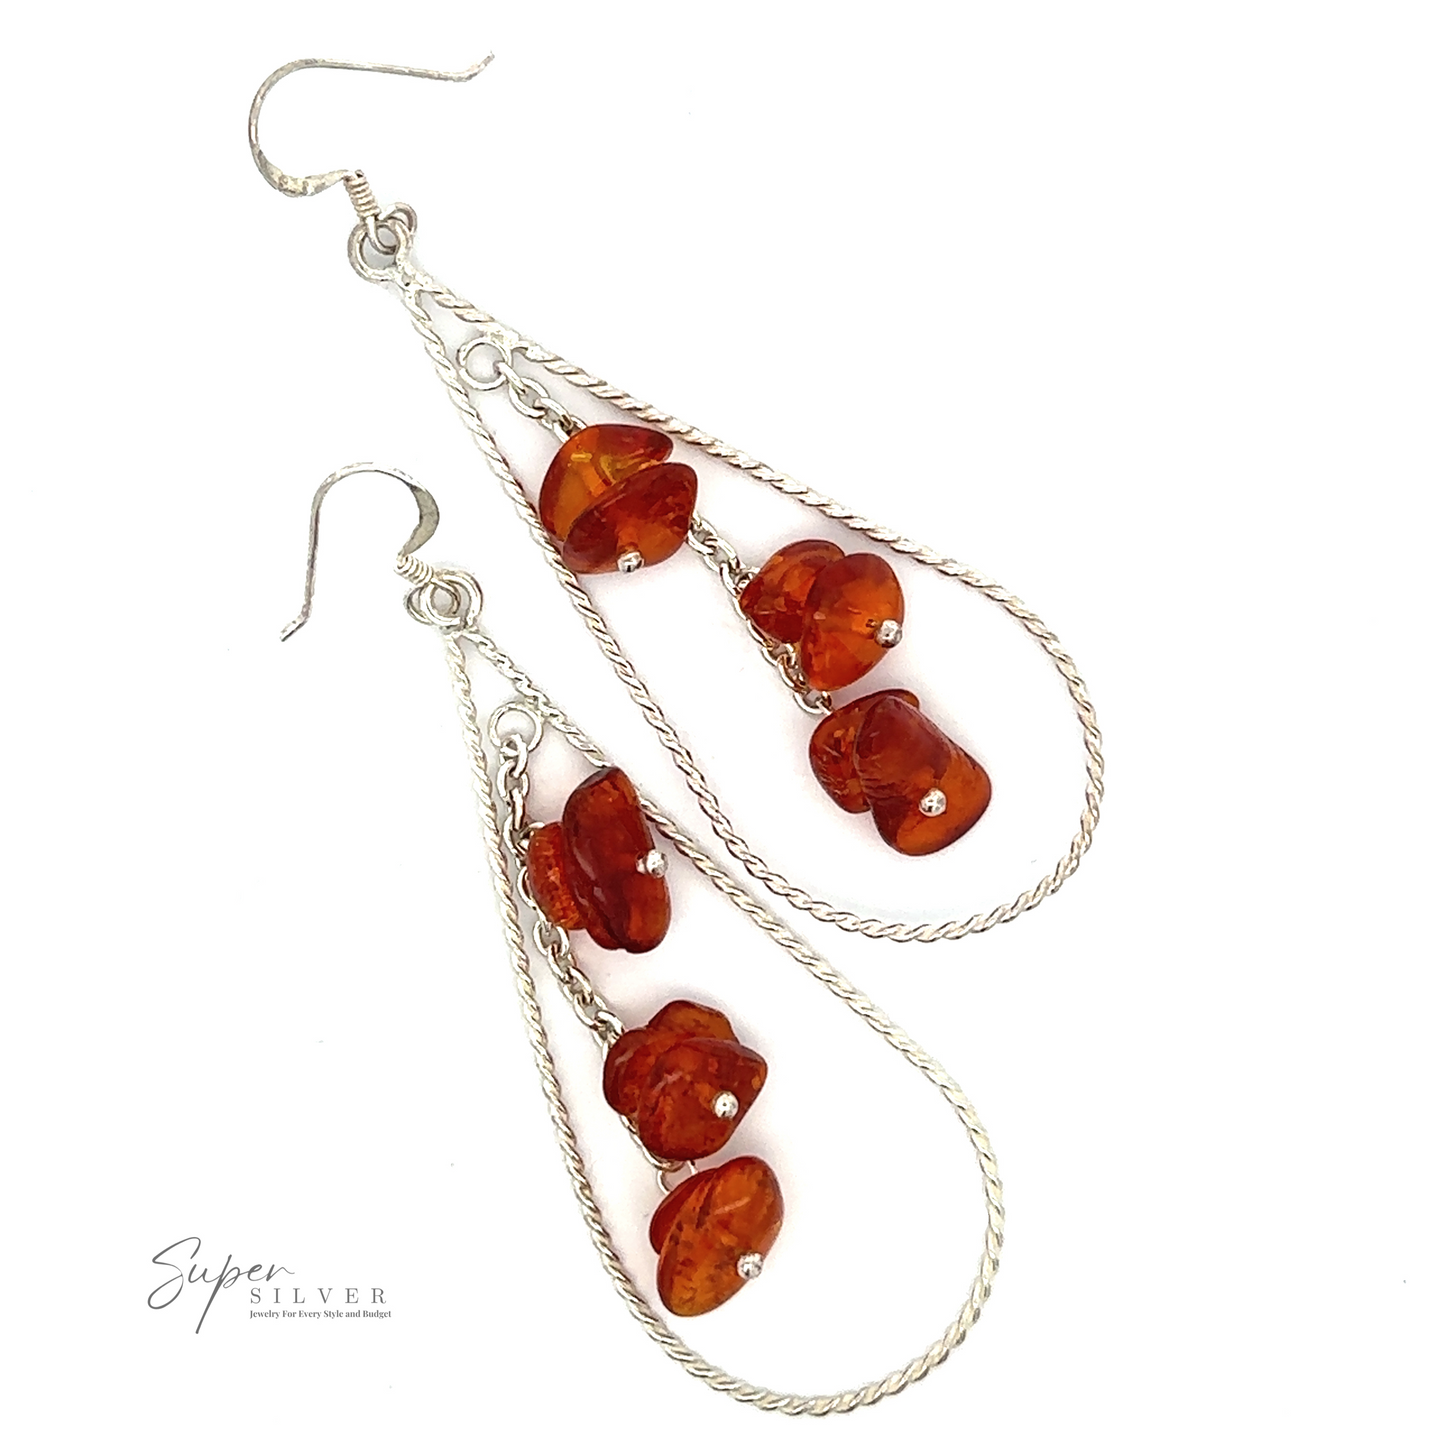 
                  
                    A pair of Teardrop Shaped Dangle Earrings with Amber, featuring three polished amber stones each, arranged in a braid-like design. A small logo in the bottom left corner reads "Super Silver." These exquisite tear drop earrings add a touch of elegance to any look.
                  
                